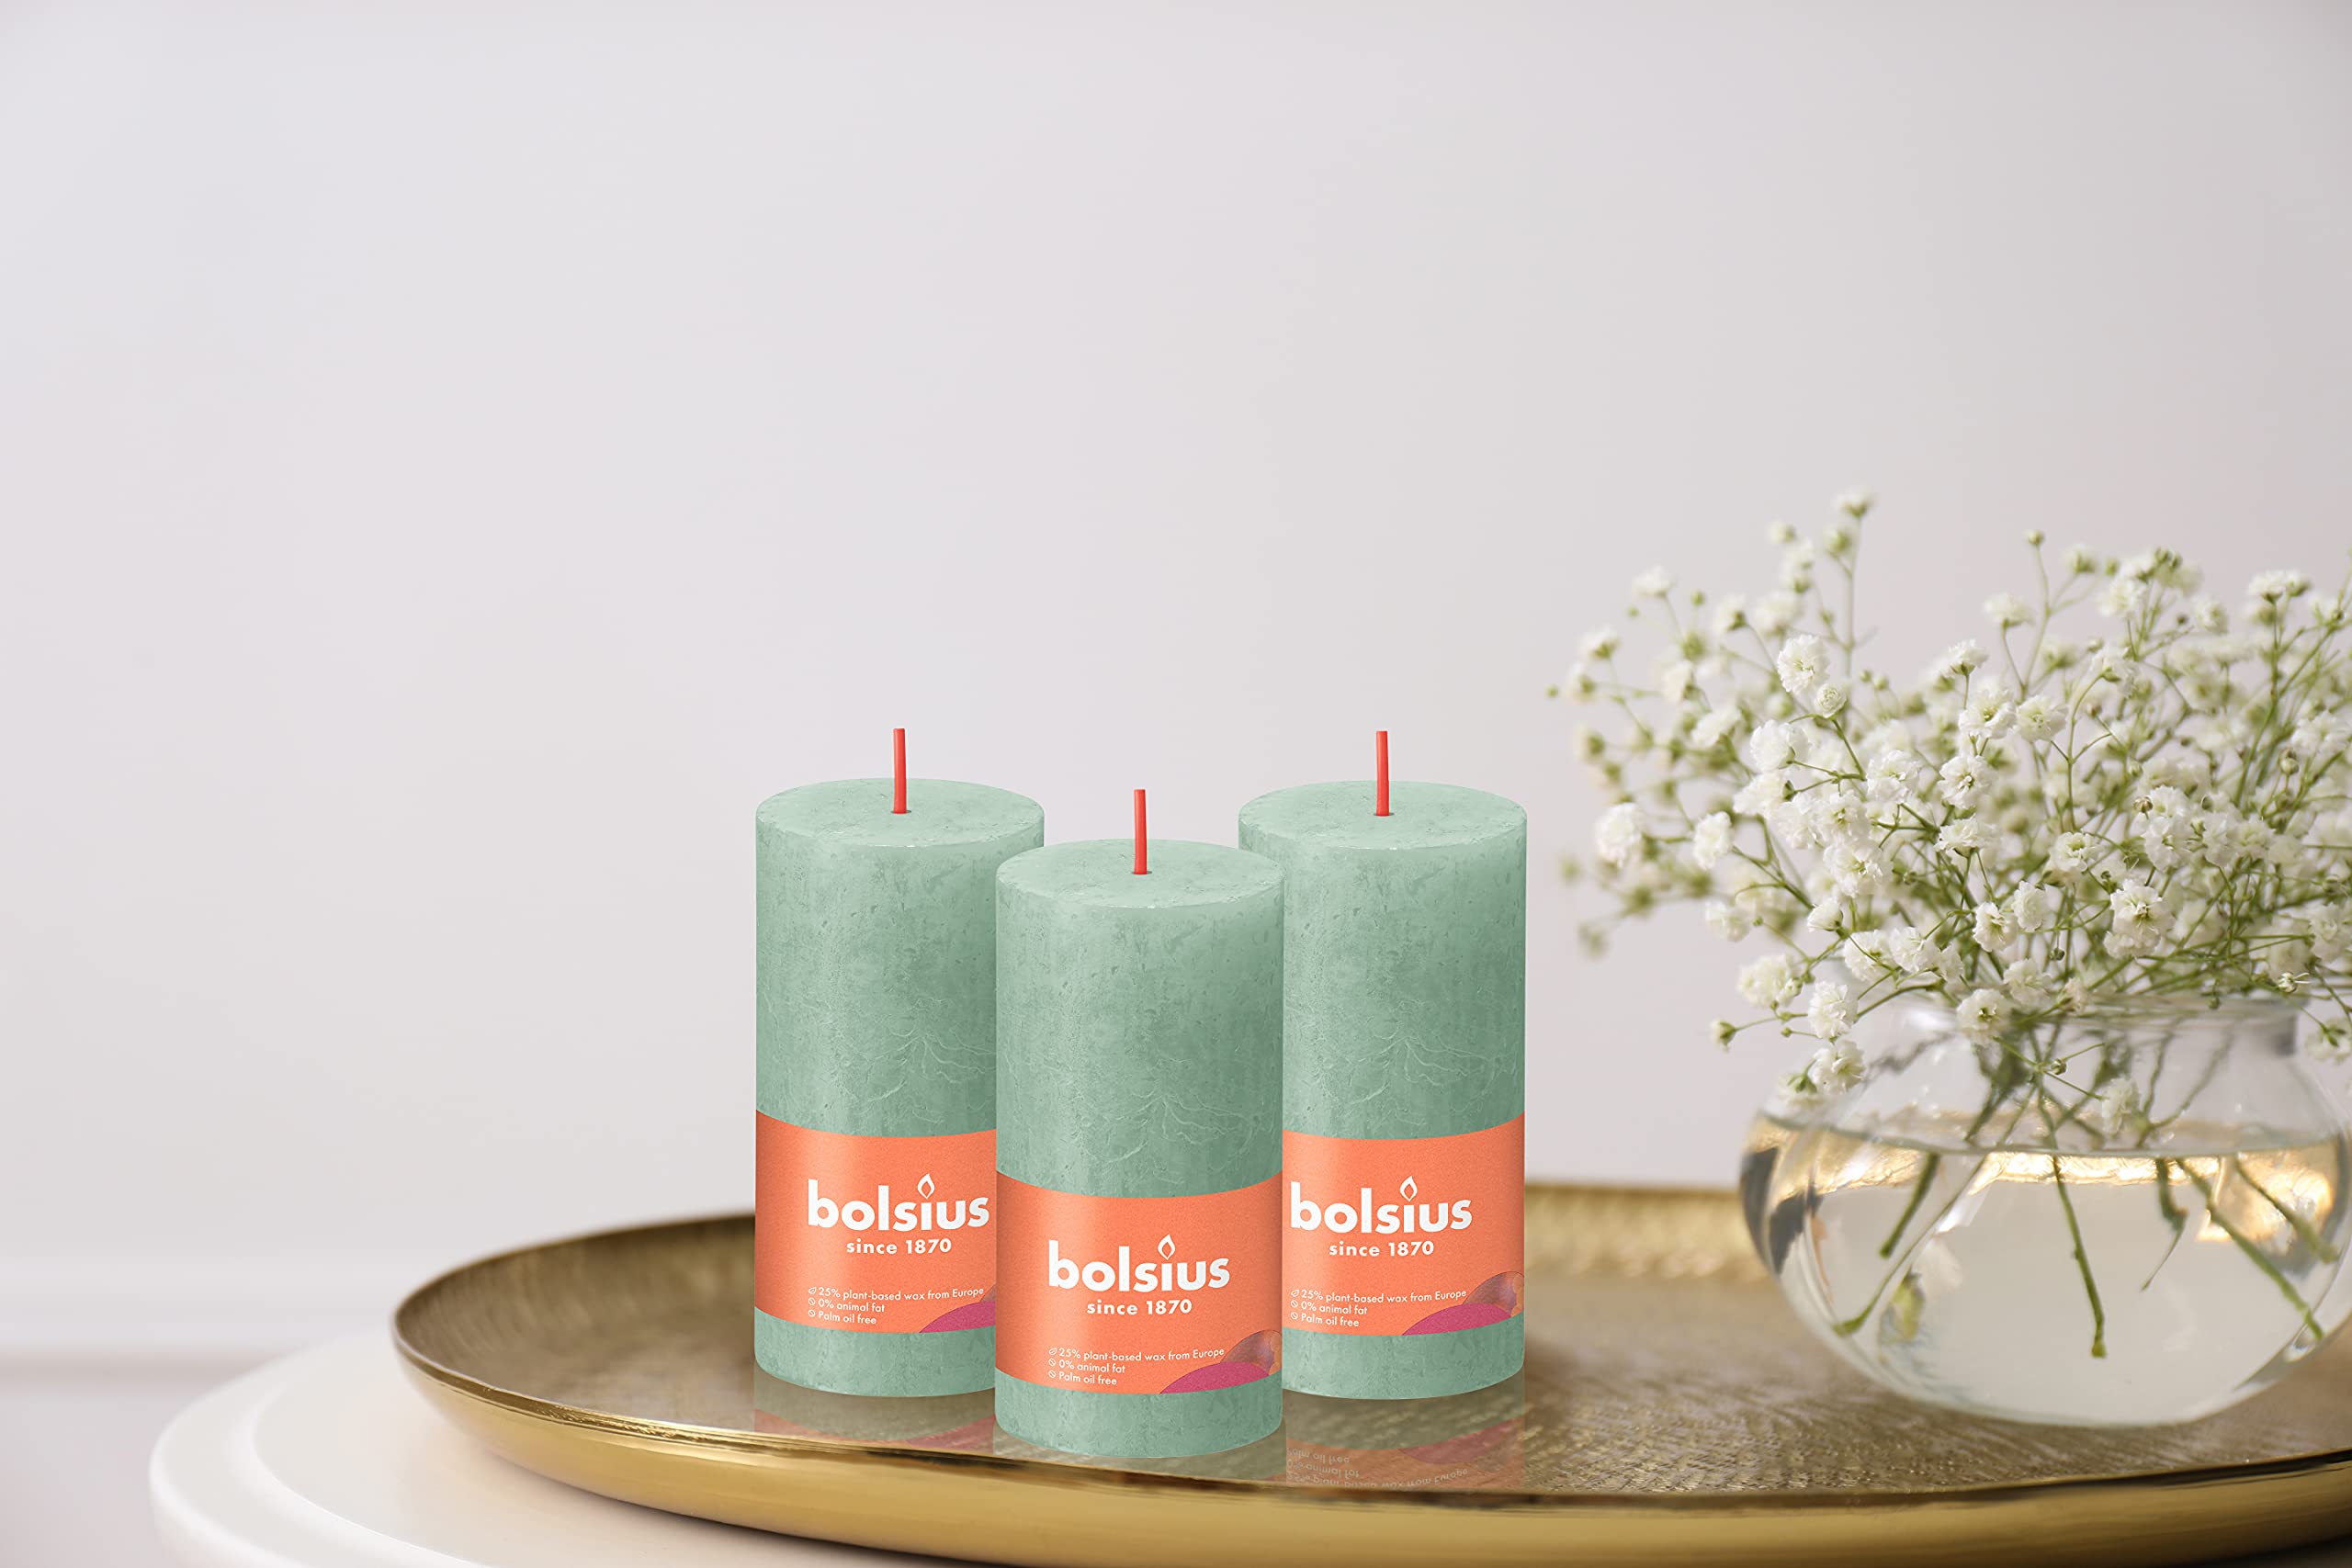 BOLSIUS 4 Pack Sage Green Rustic Pillar Candles - 2 X 4 Inches - Premium European Quality - Includes Natural Plant-Based Wax - Unscented Dripless Smokeless 30 Hour Party and Wedding Candles  - Acceptable